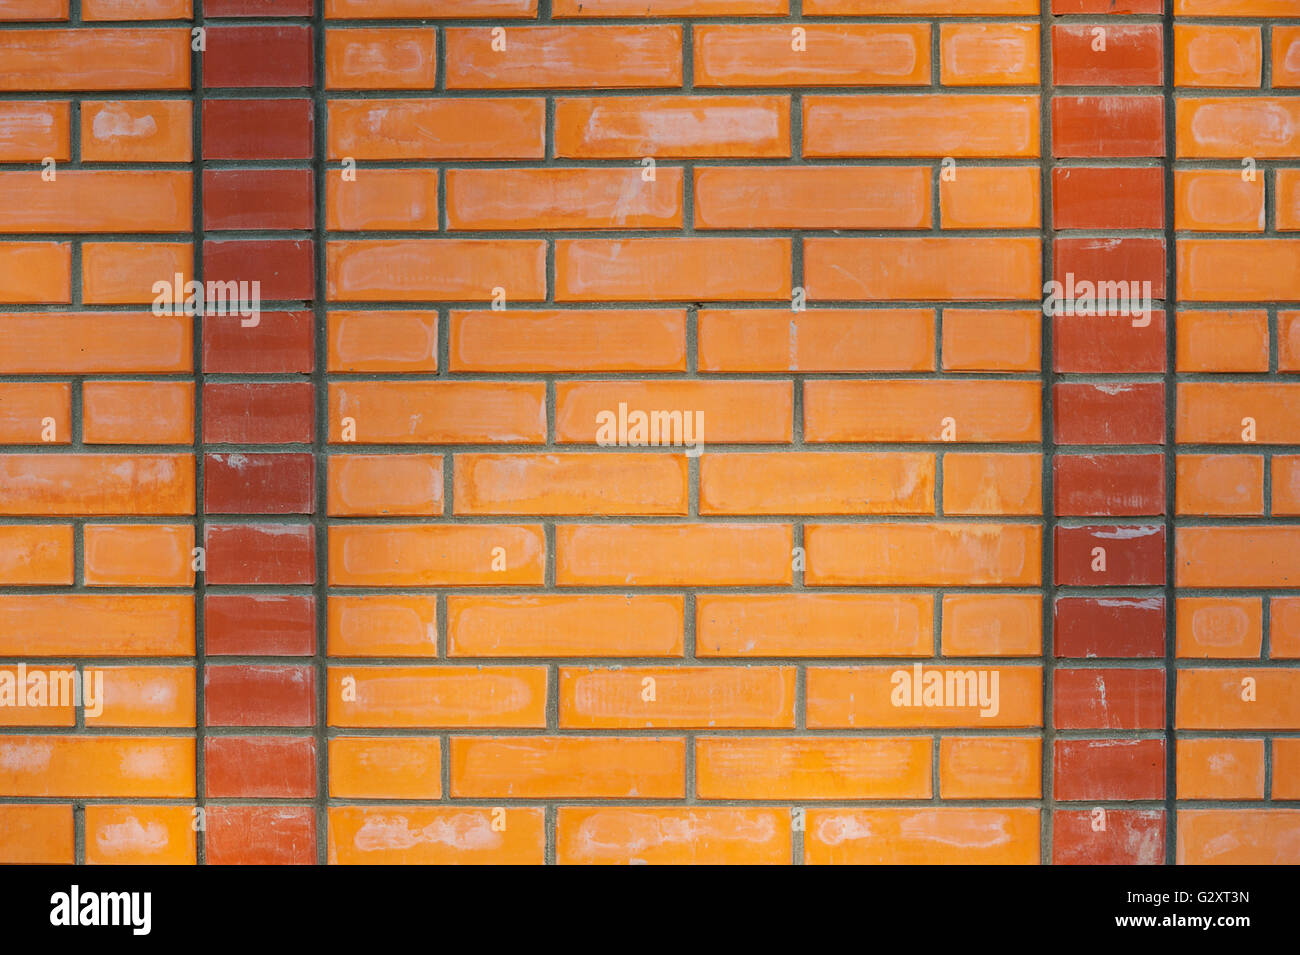 Brick wall background with two stripes Stock Photo